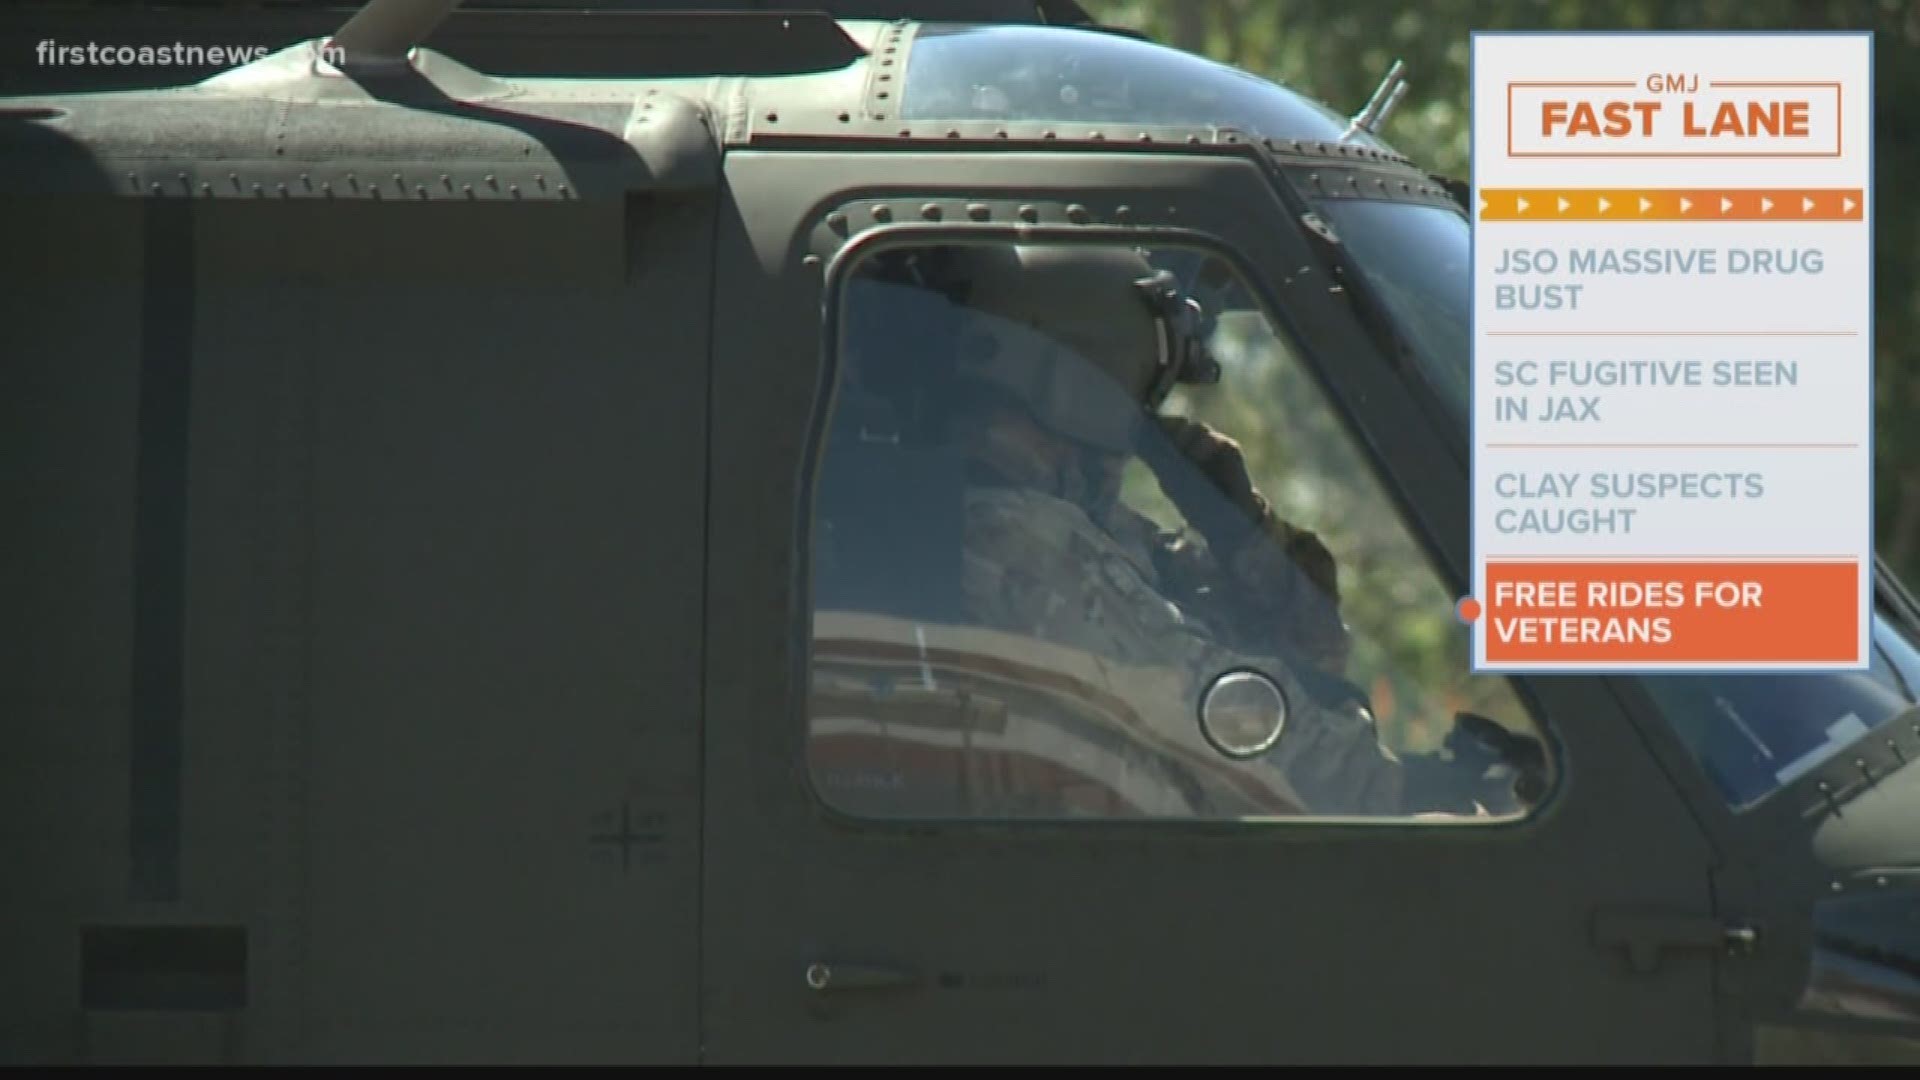 Veterans can get free rides starting today via a ridesharing app.